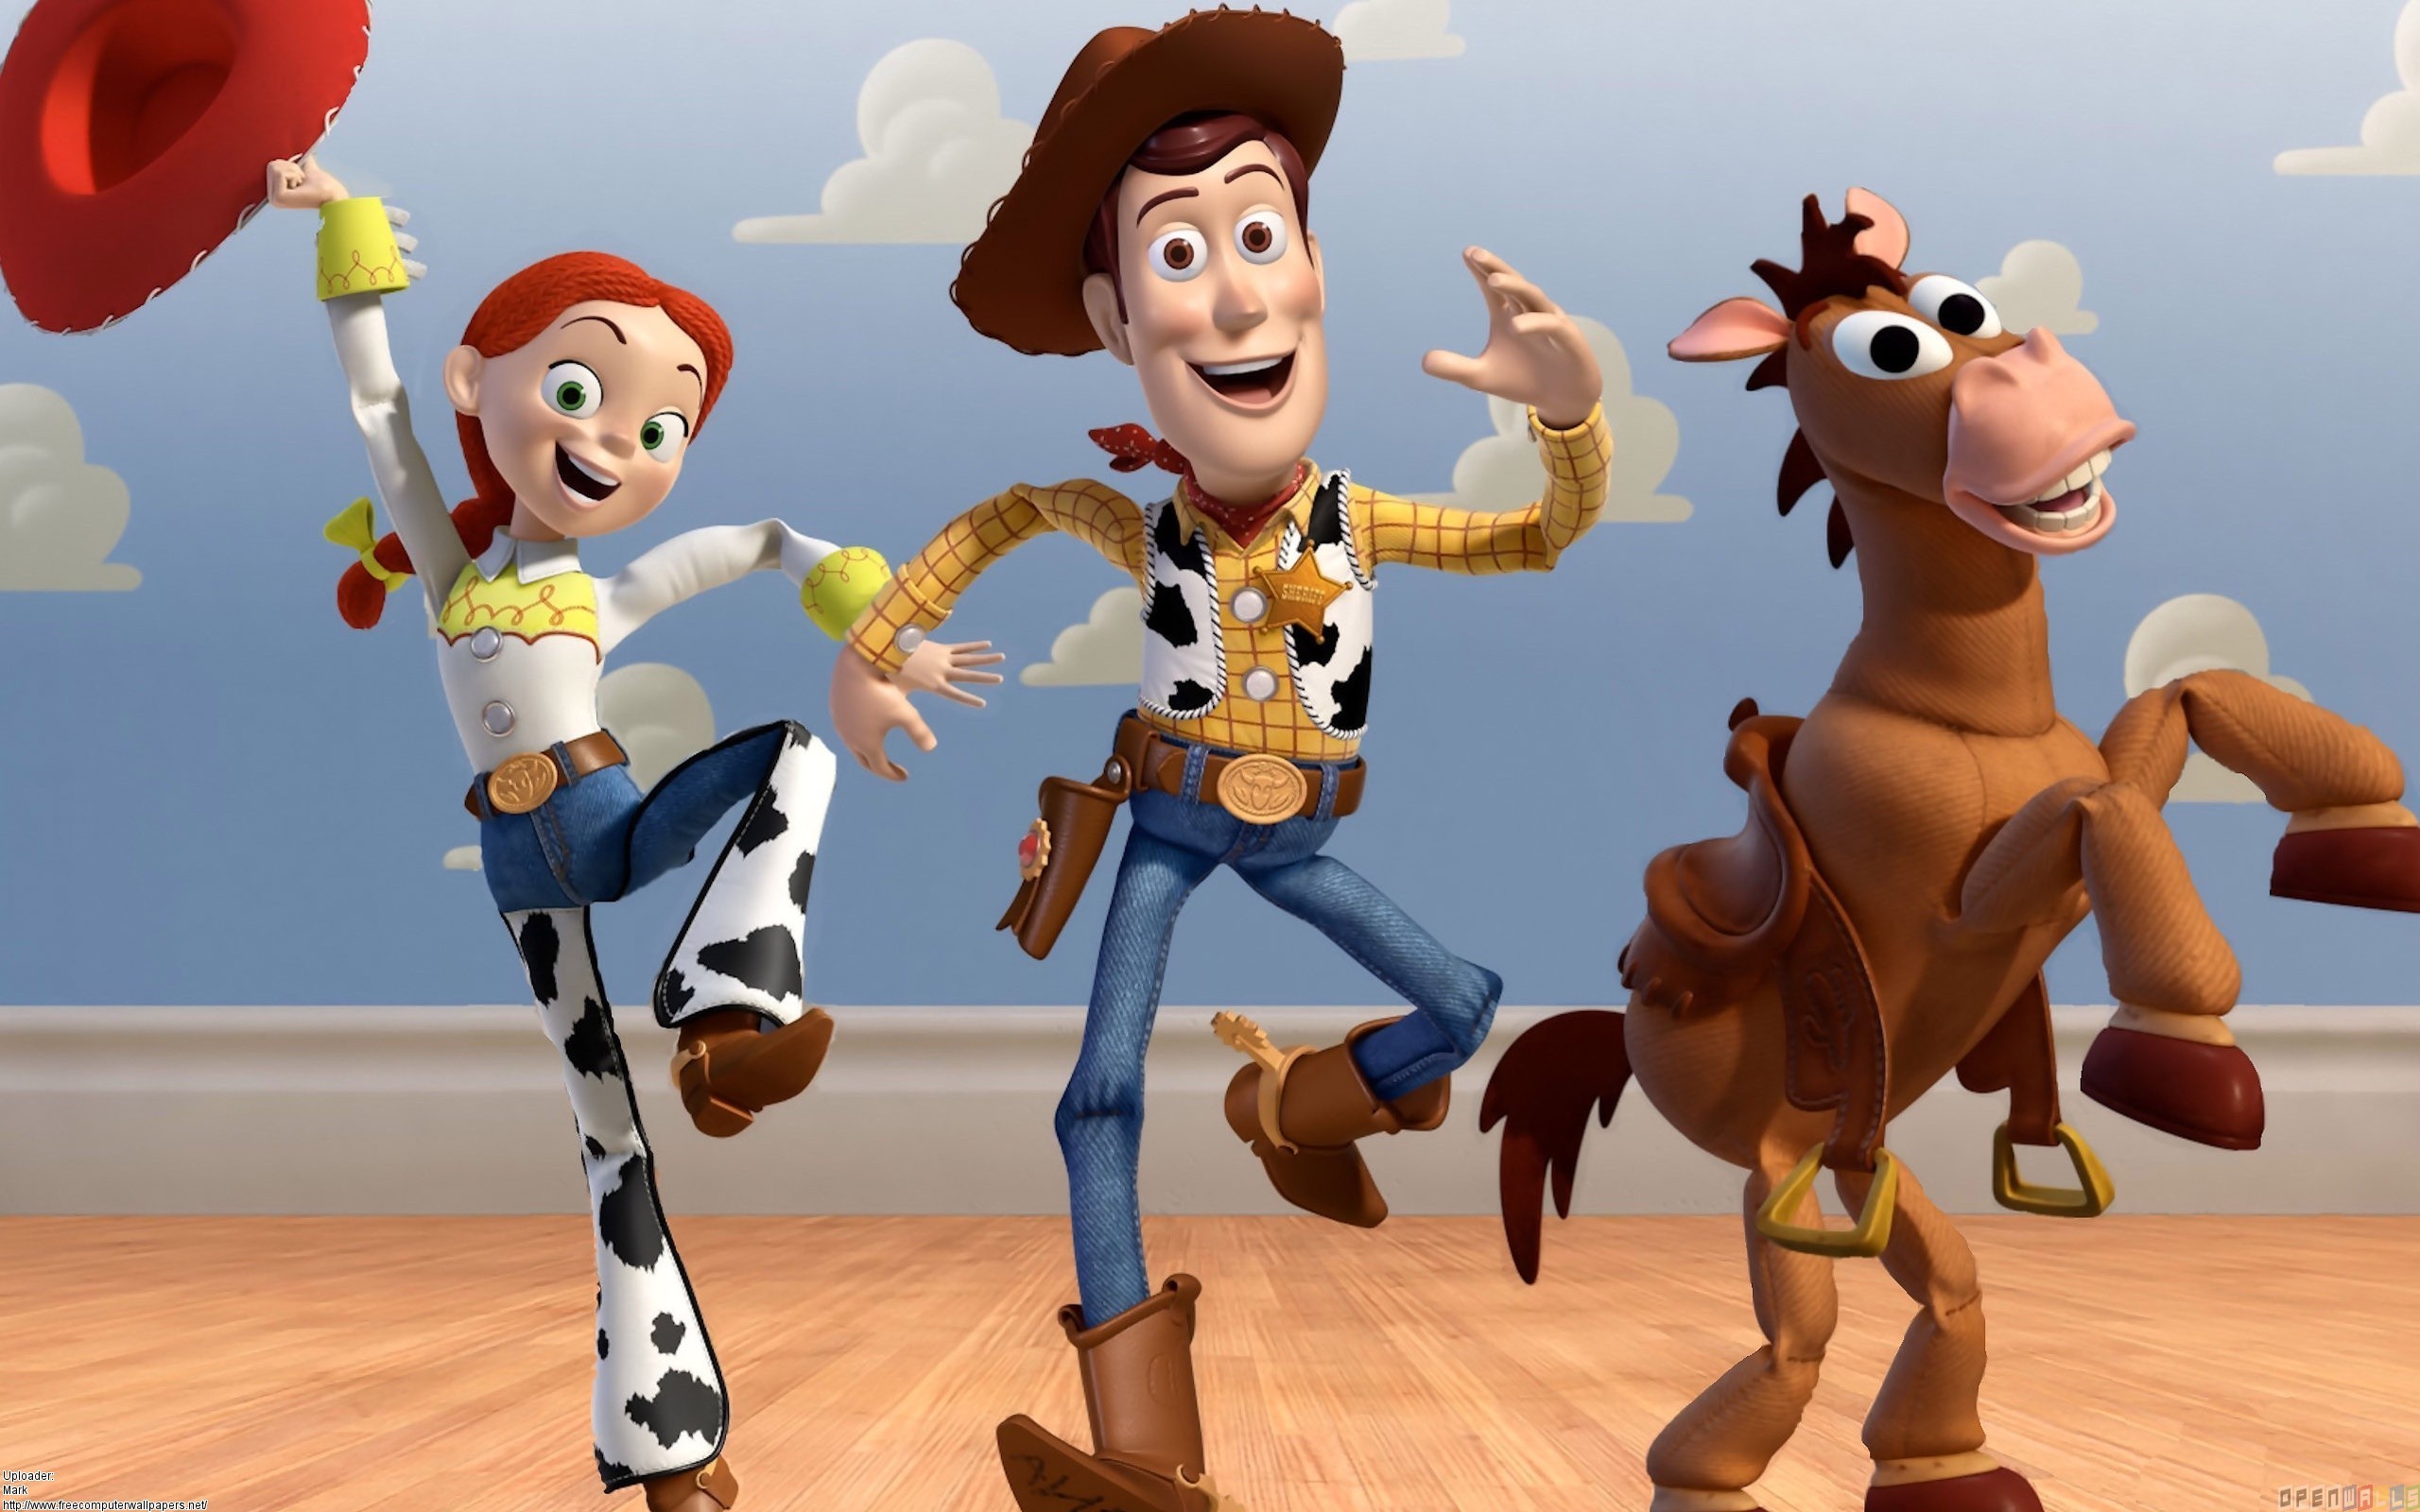 2560x1600 woody toy story quotes - Google Search